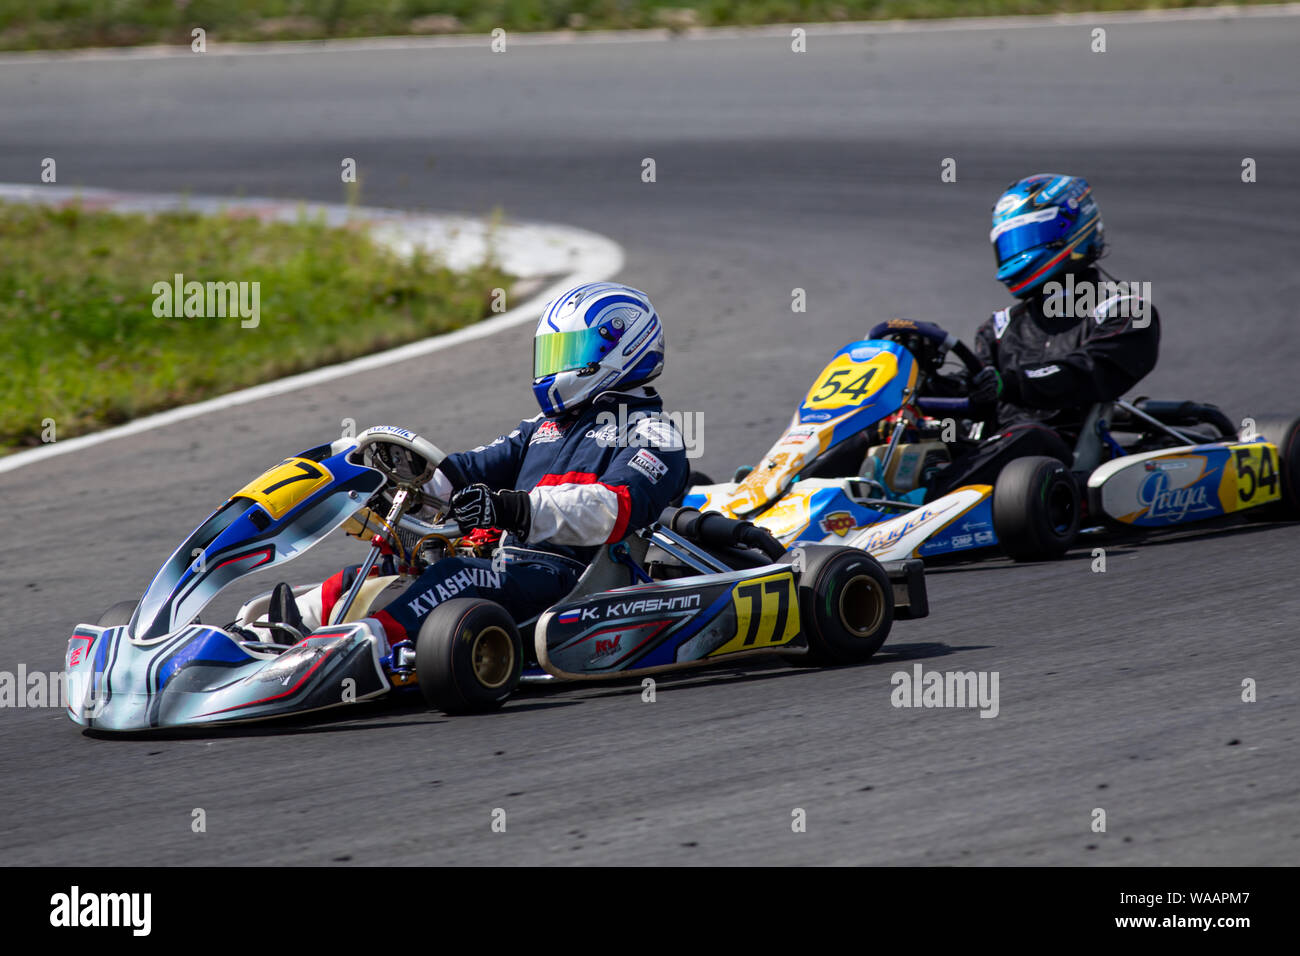 Unidentified pilots compete on the Atron track in the Rotax max Cup RAF series of sports karting, track race Stock Photo